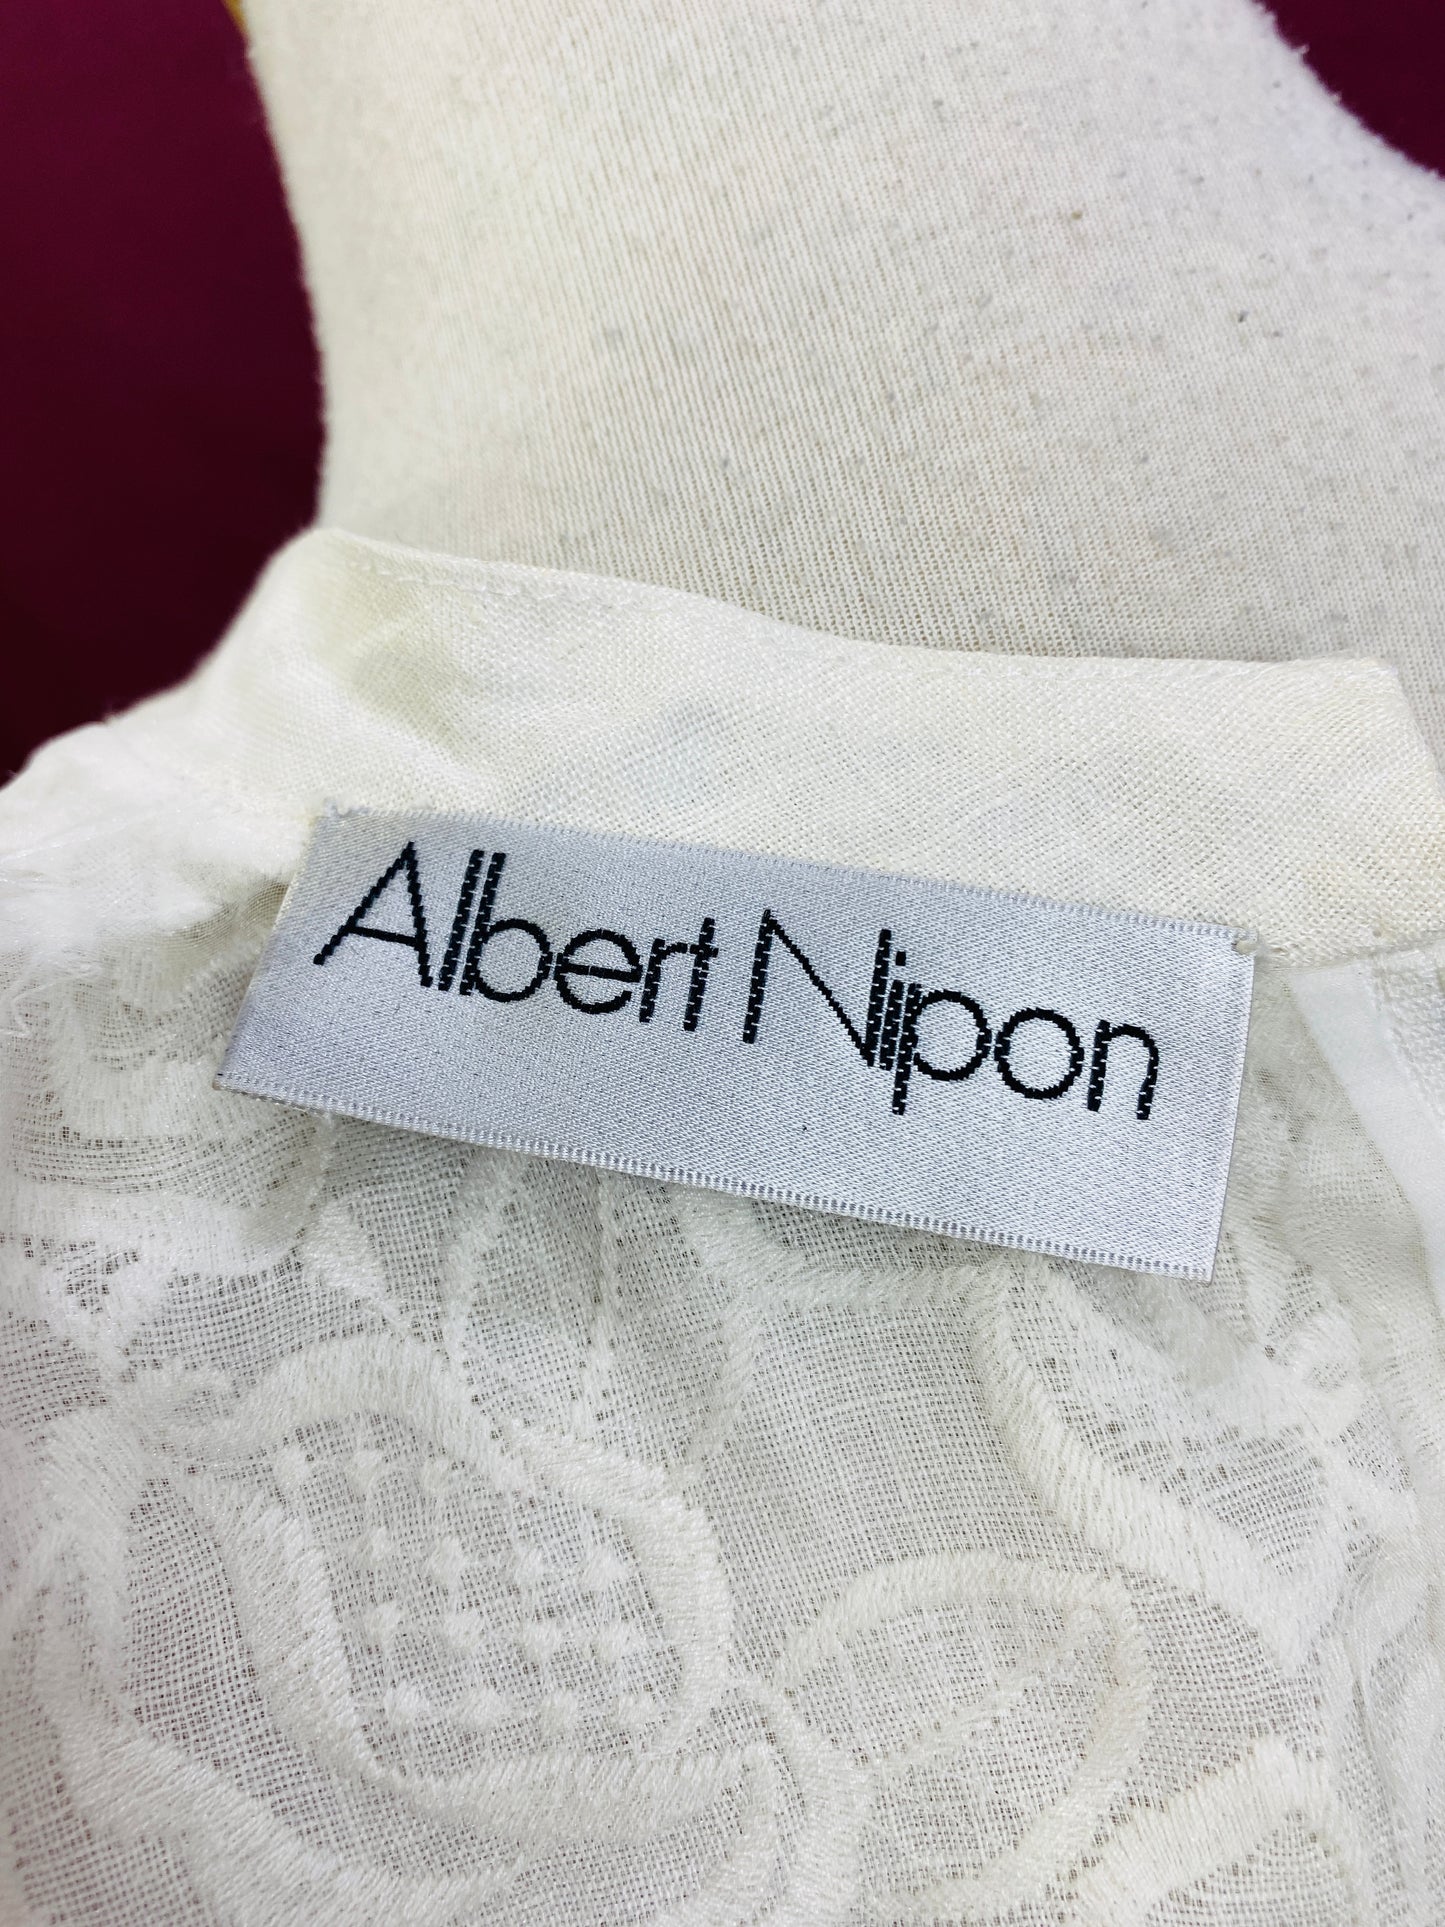 Vintage 1980s Albert Nipon White Linen Puff-Sleeve Embroidered Dress with Bow Belt, Small